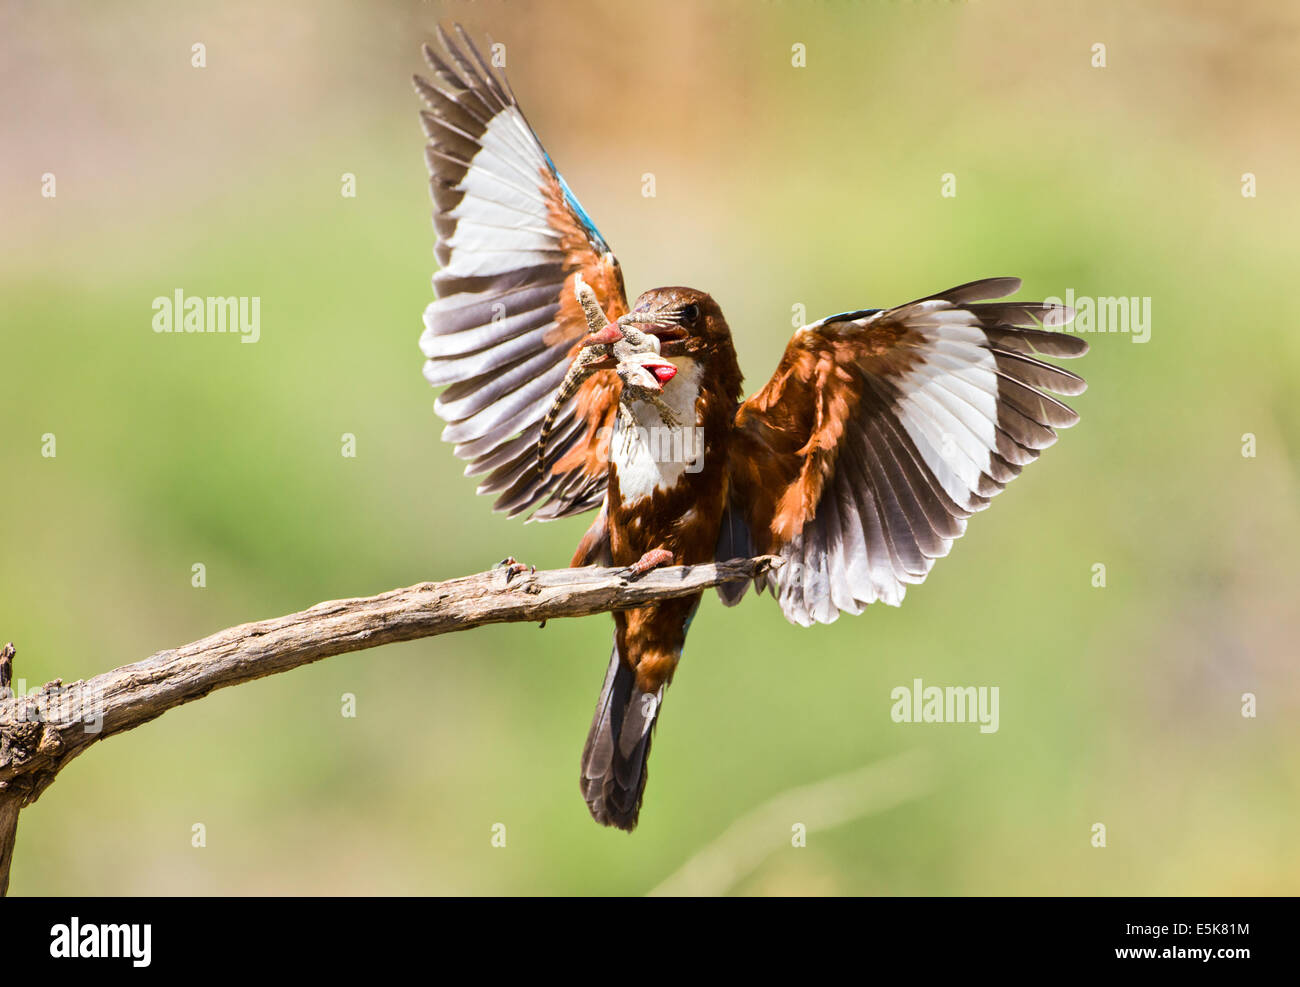 White-throated Kingfisher (Halcyon smyrnensis) with a lizard in its beak, Photographed in Israel Stock Photo